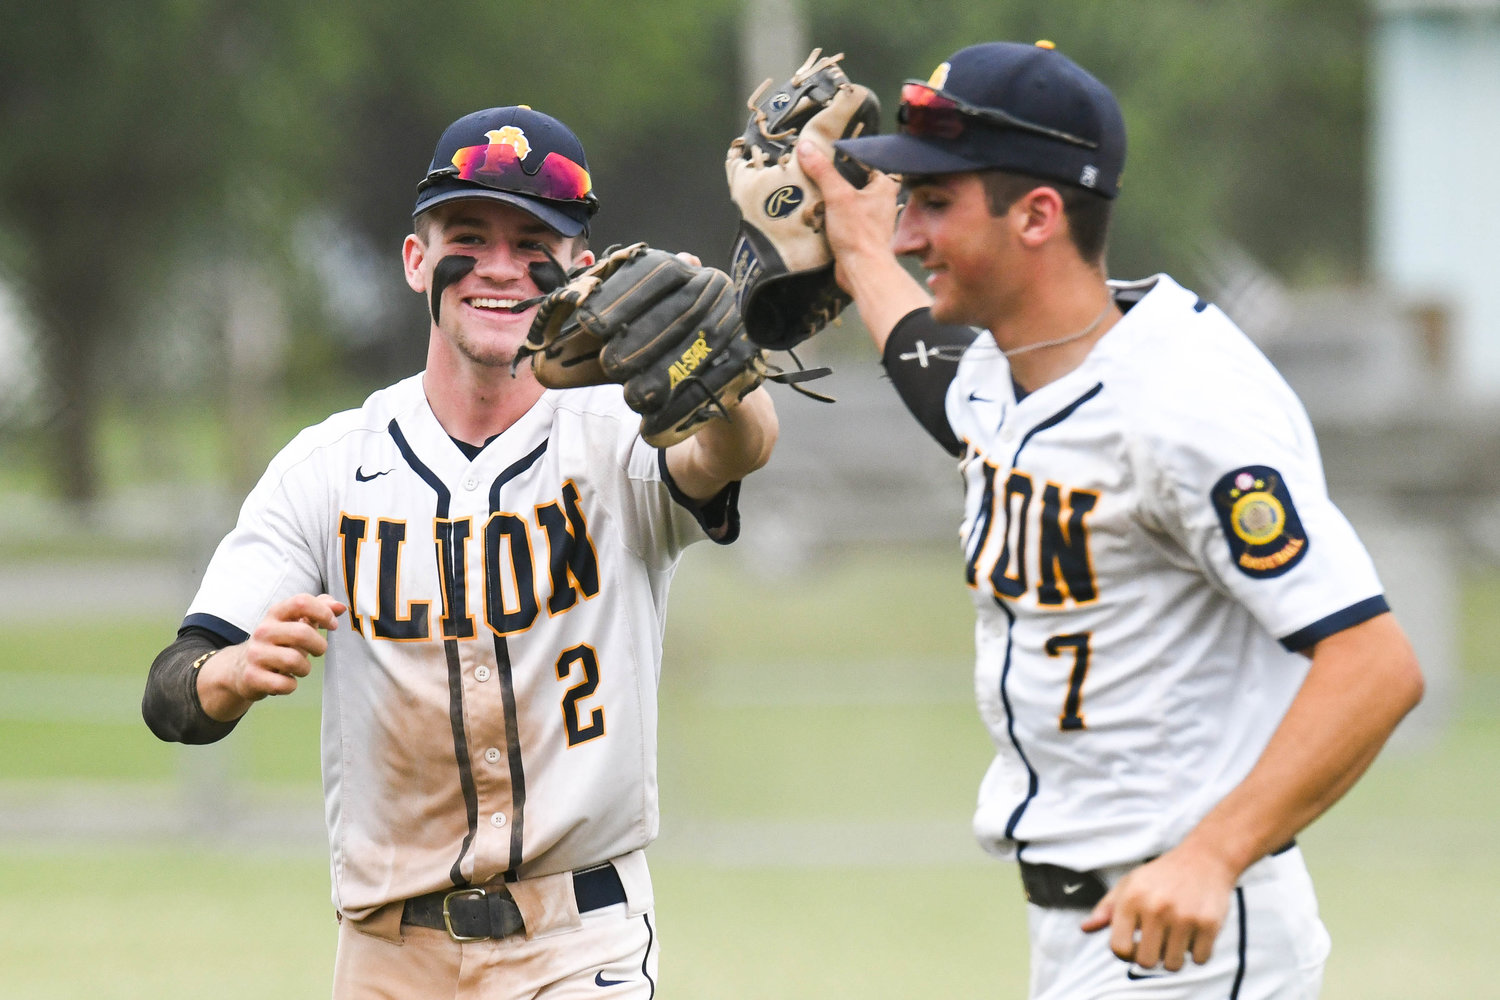 Ilion Post’s Tanner Warren (2) and Alan Meszler (7) celebrate after making an out during the game against Utica Post on Wednesday at Central Valley Academy in Ilion. Utica Post won 12-10 in eight innings.